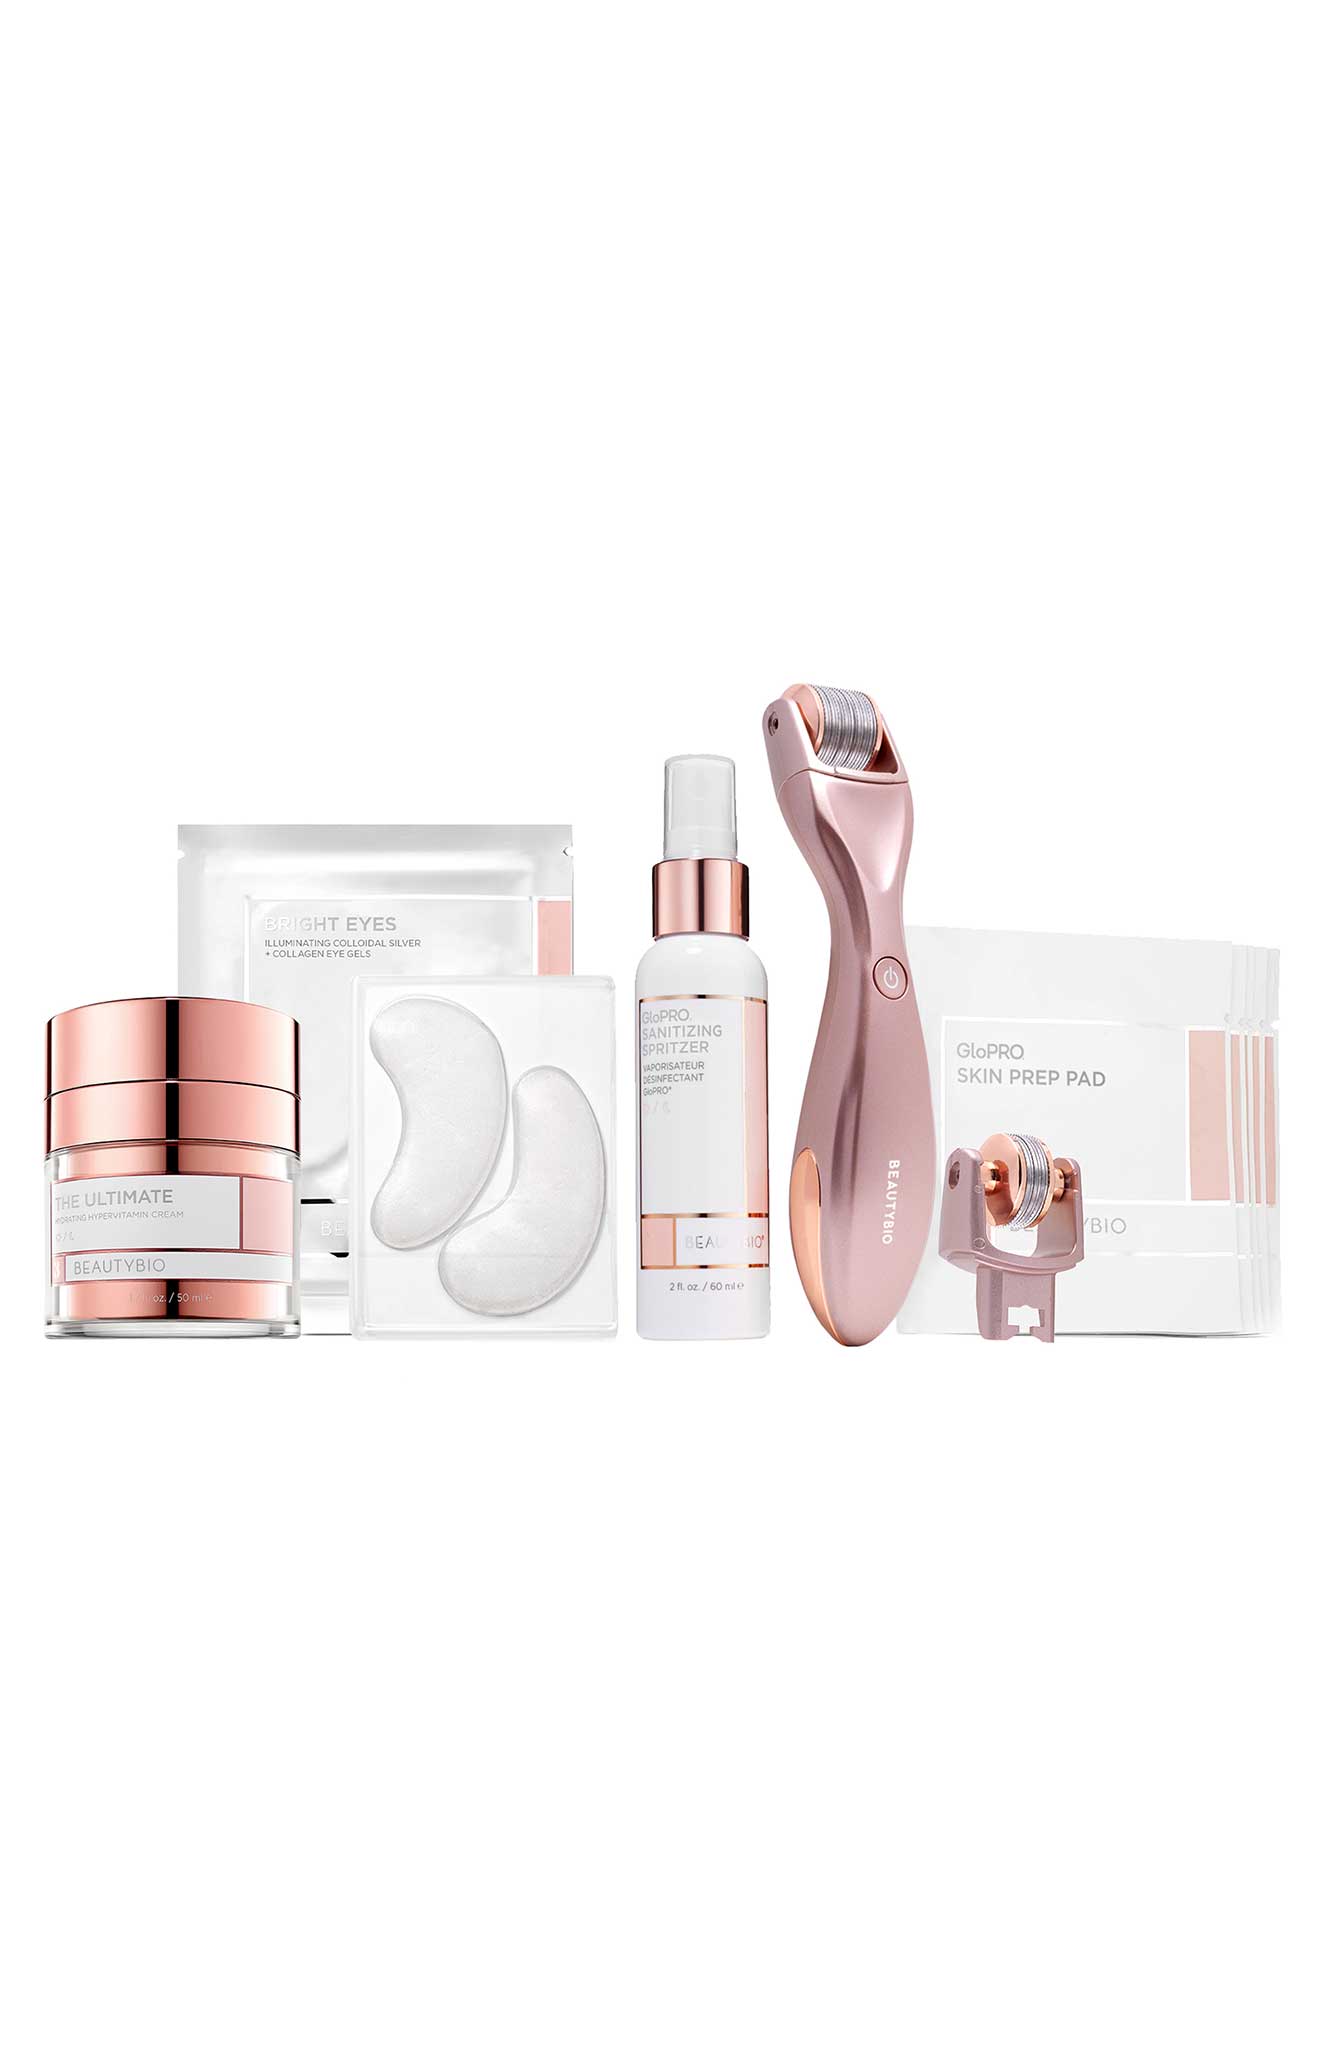 BeautyBio GloPro Complete Set: This set is your one-stop shop for a complete regimen of self-care at home. It includes the Glo Pro, one of the hottest selling tools, as well as eye patches and a full-size face cream, The Ultimate!